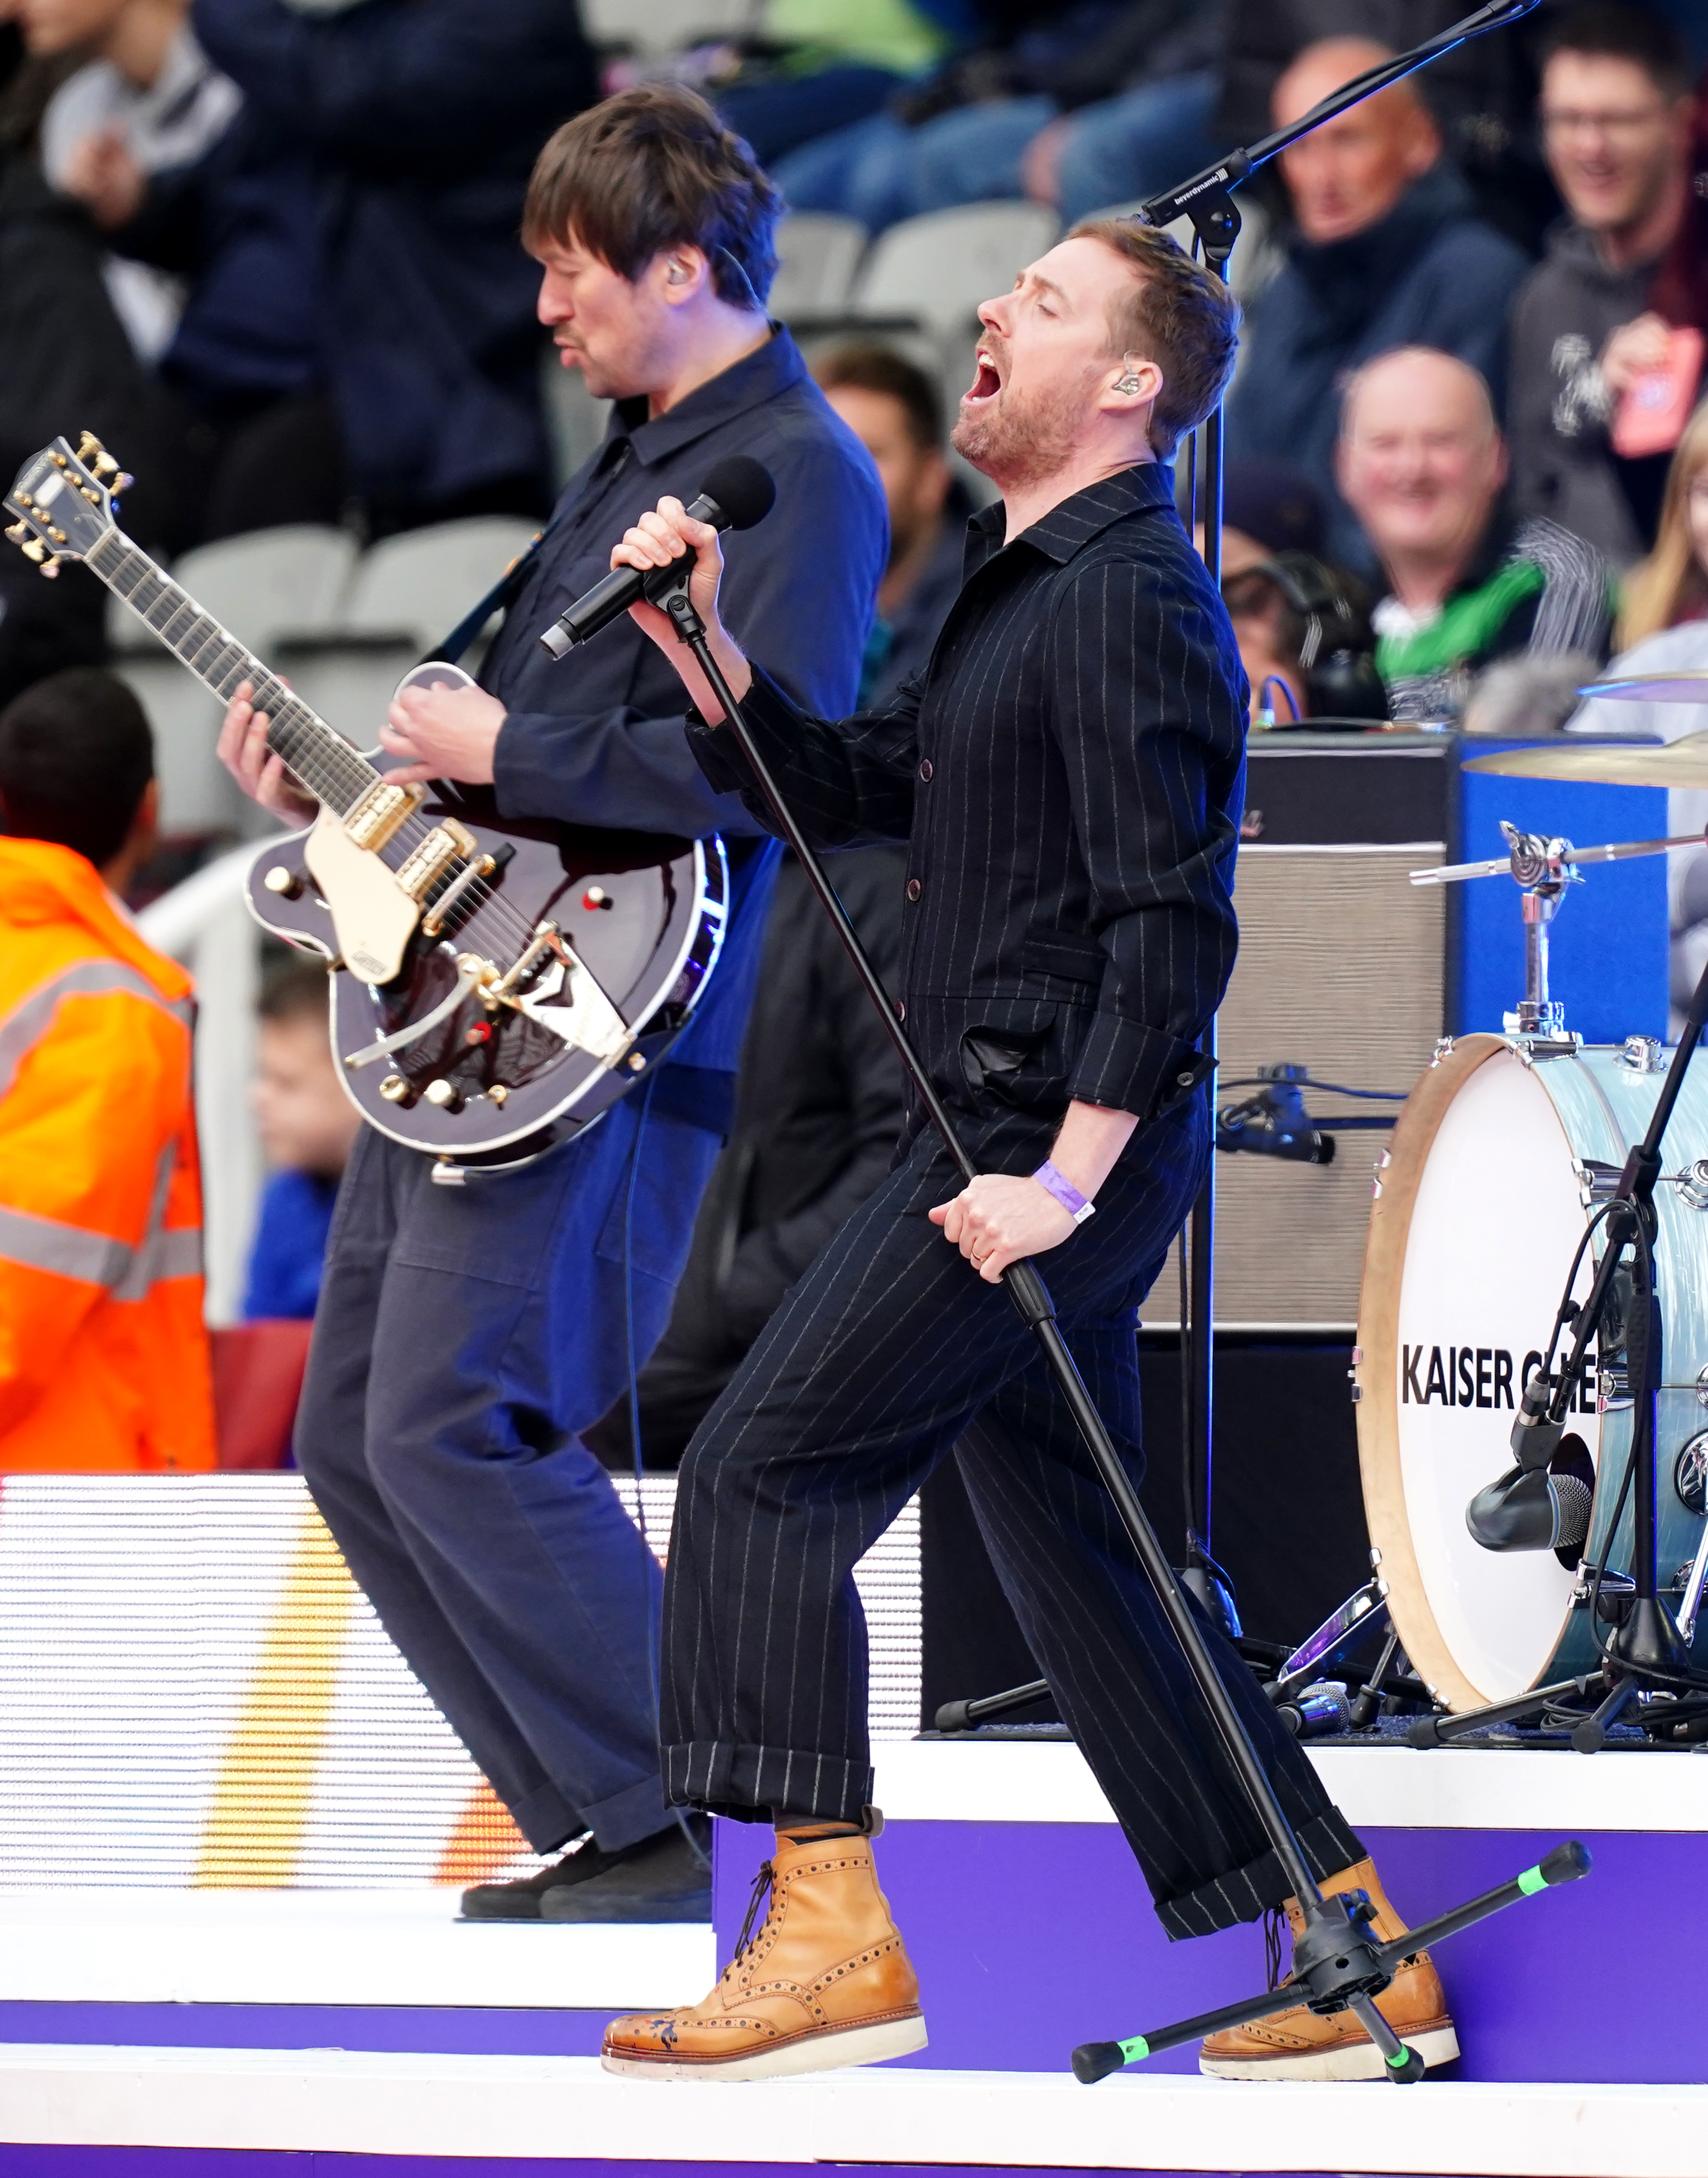 Ricky Wilson performs prior to the Rugby League World Cup group A match at St James' Park, Newcastle upon Tyne. Picture date: Saturday October 15, 2022.